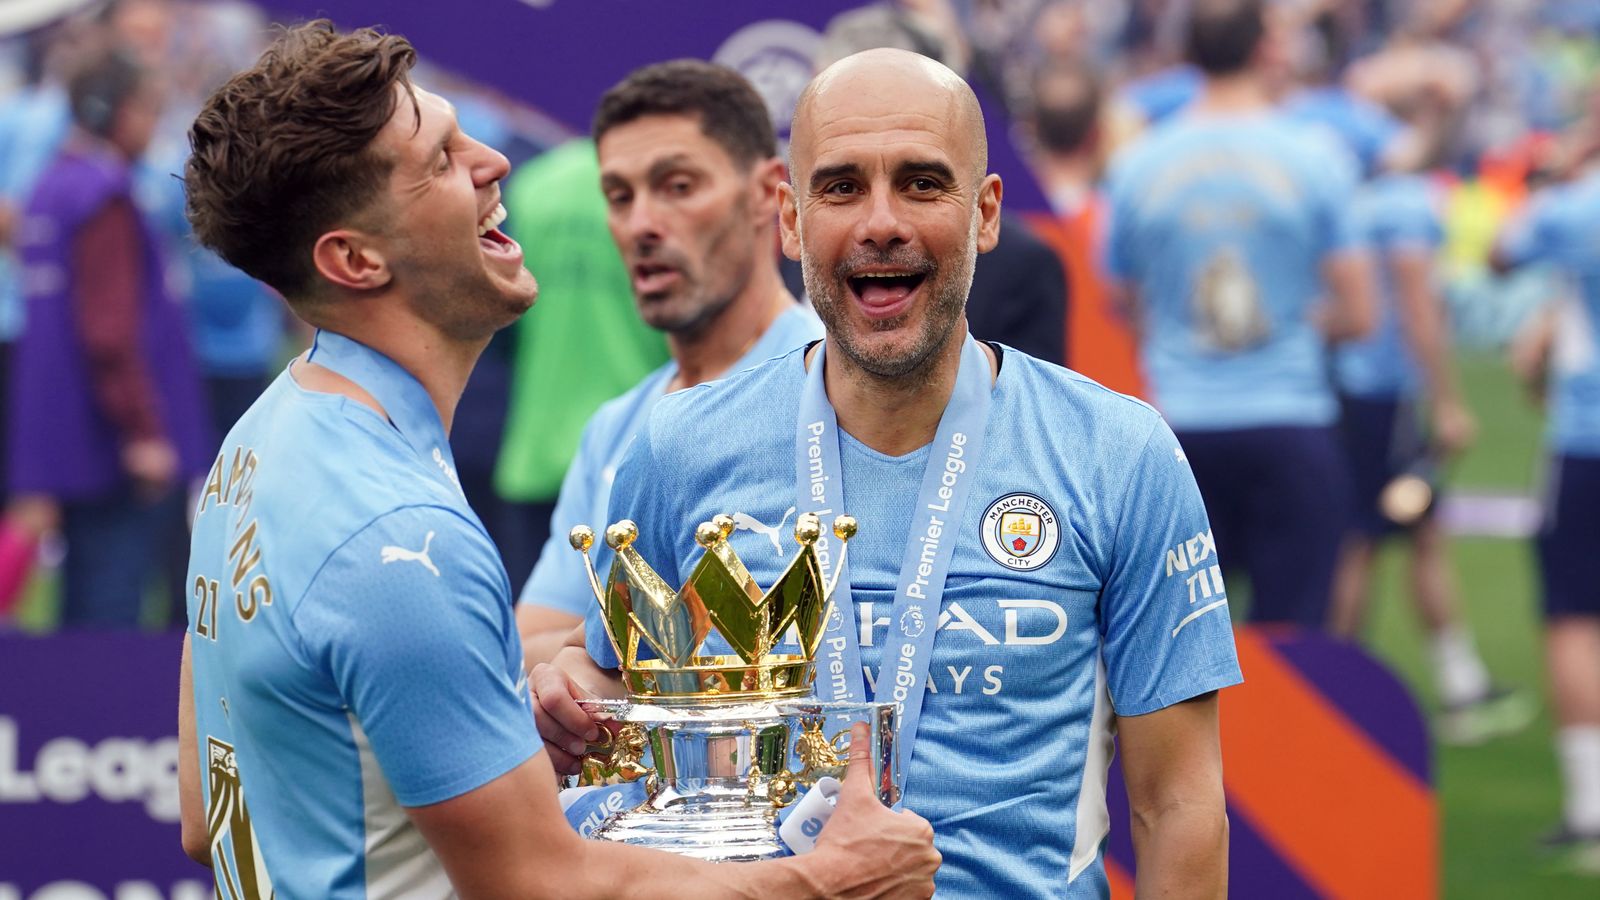 Pep Guardiola gets his own ‘Sergio Aguero’ moment at Manchester City – Final-Day Hits and Misses: